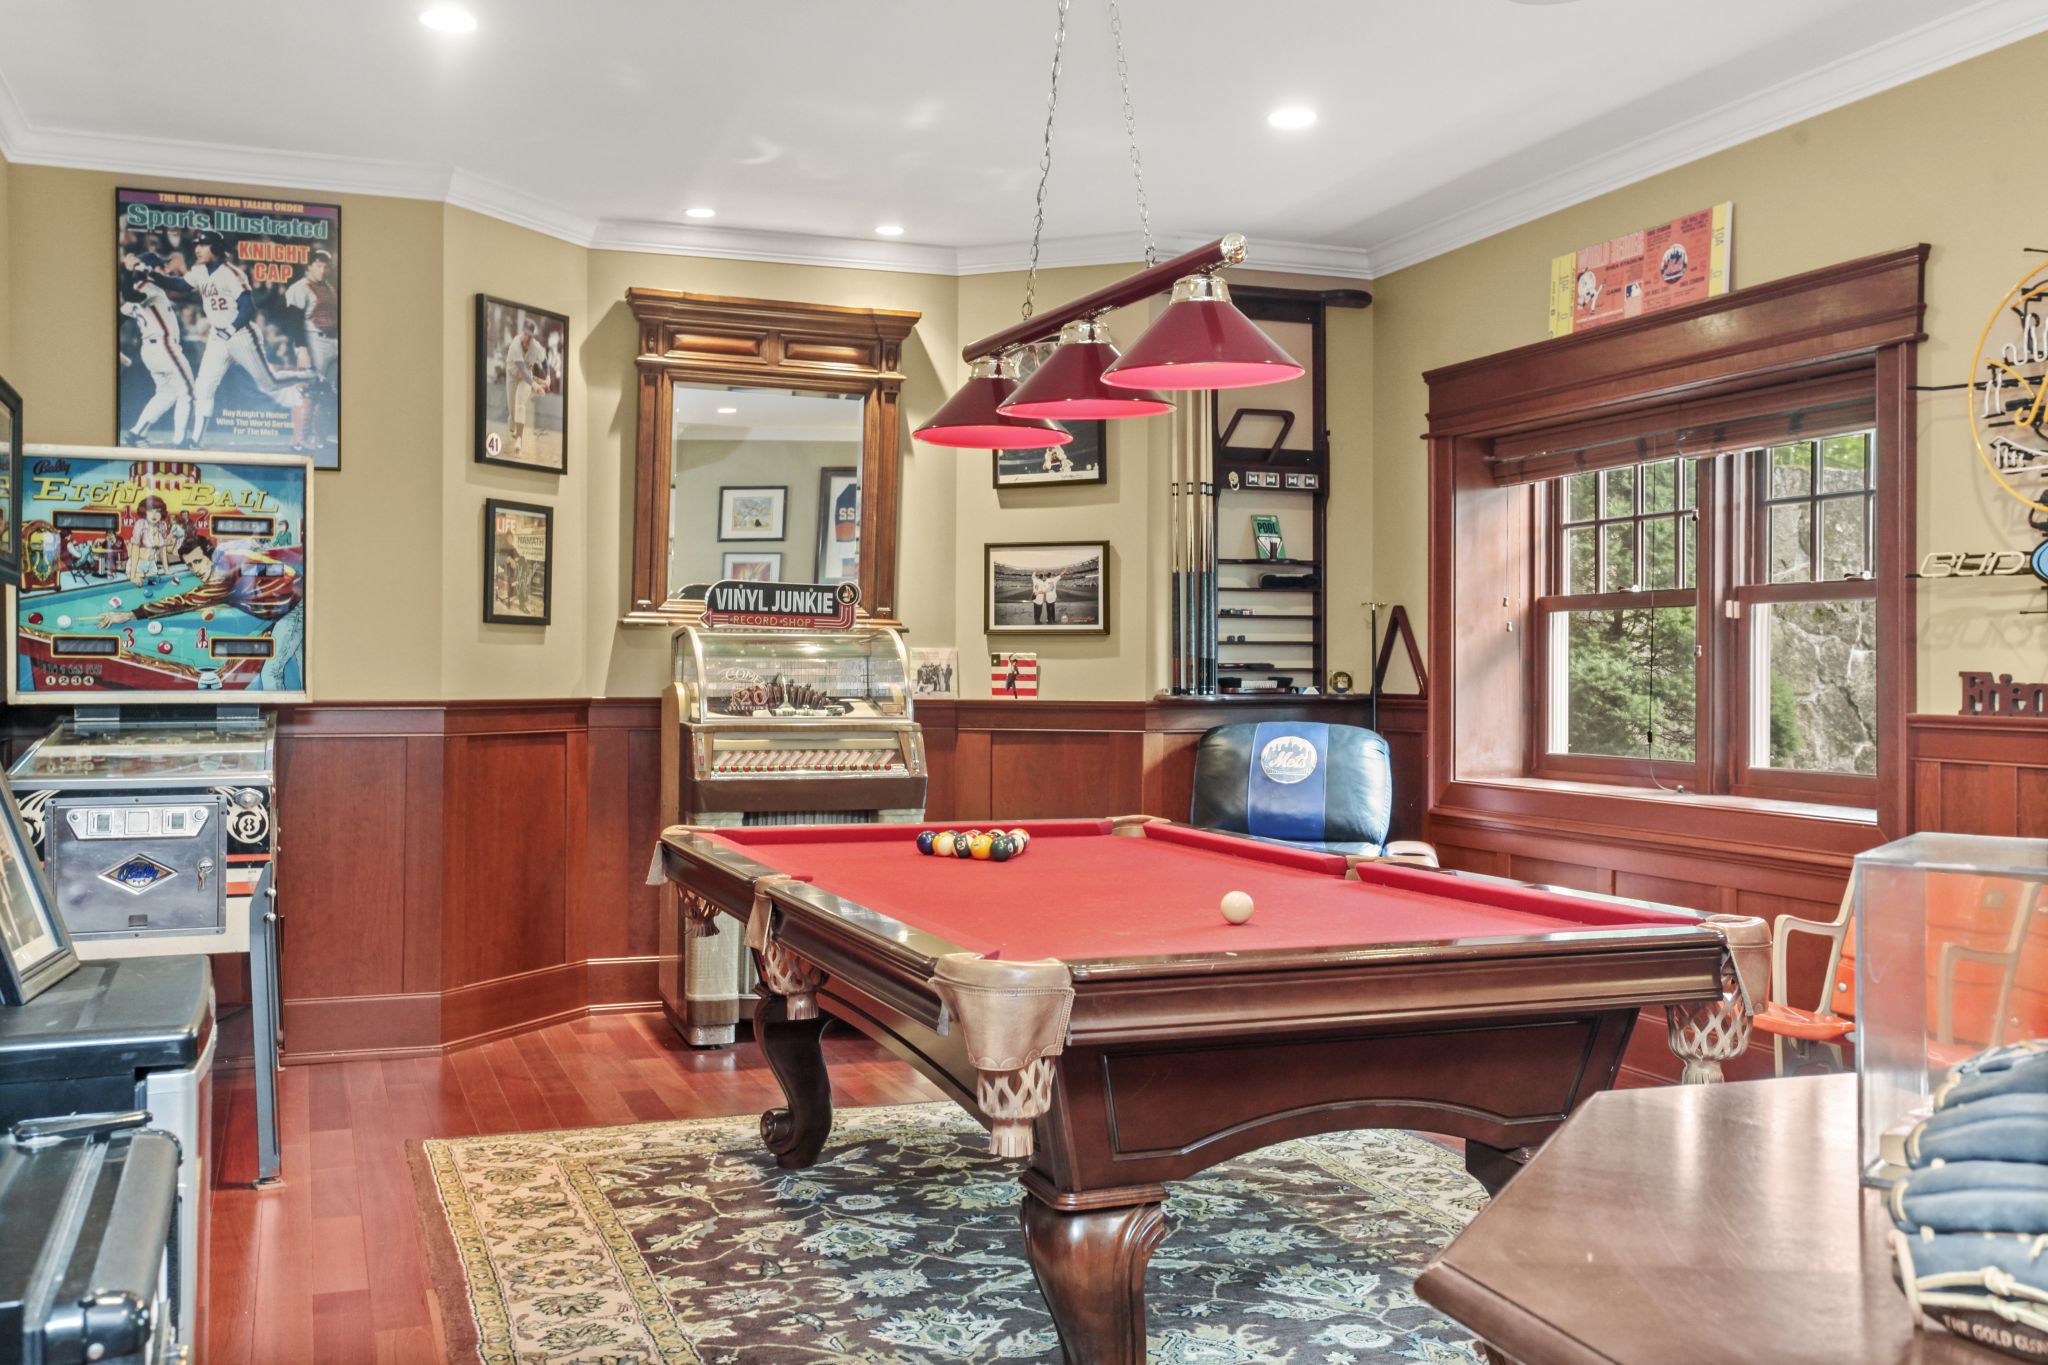 Report Howard Stern Show producer Baba Booey lists Connecticut home for $3.2M photo